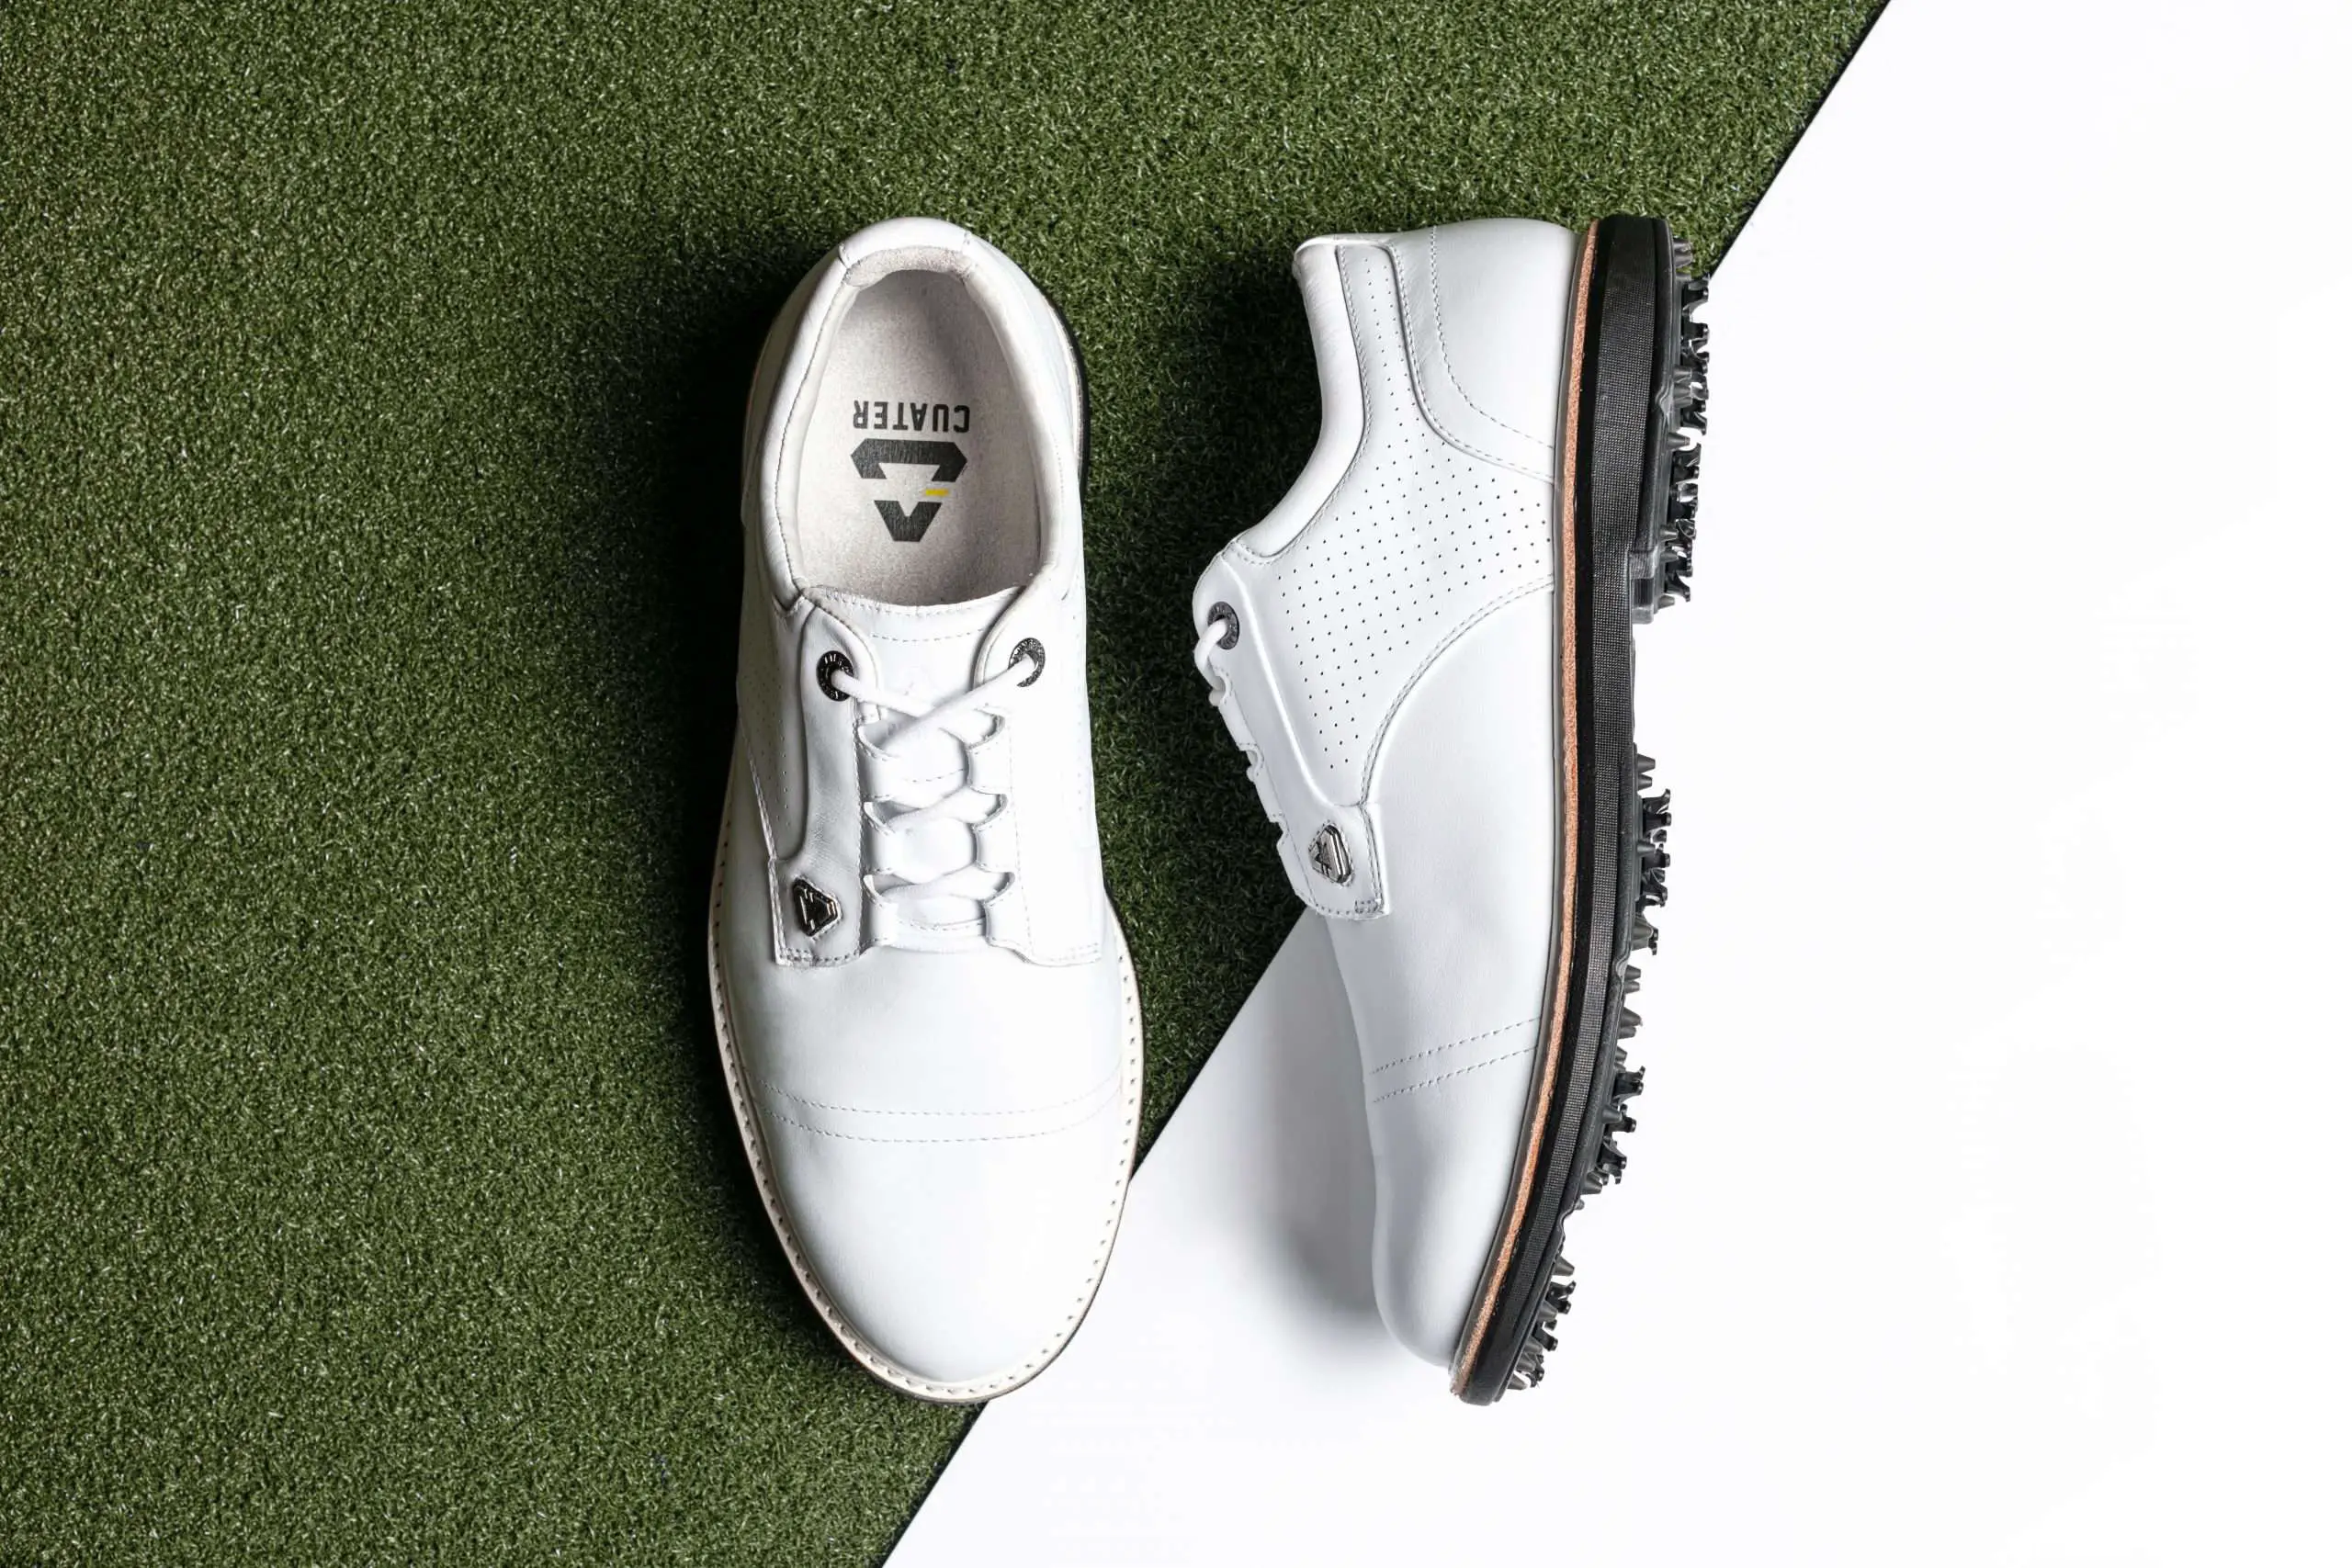 Pin by TravisMathew Apparel on CUATER GOLF SHOES